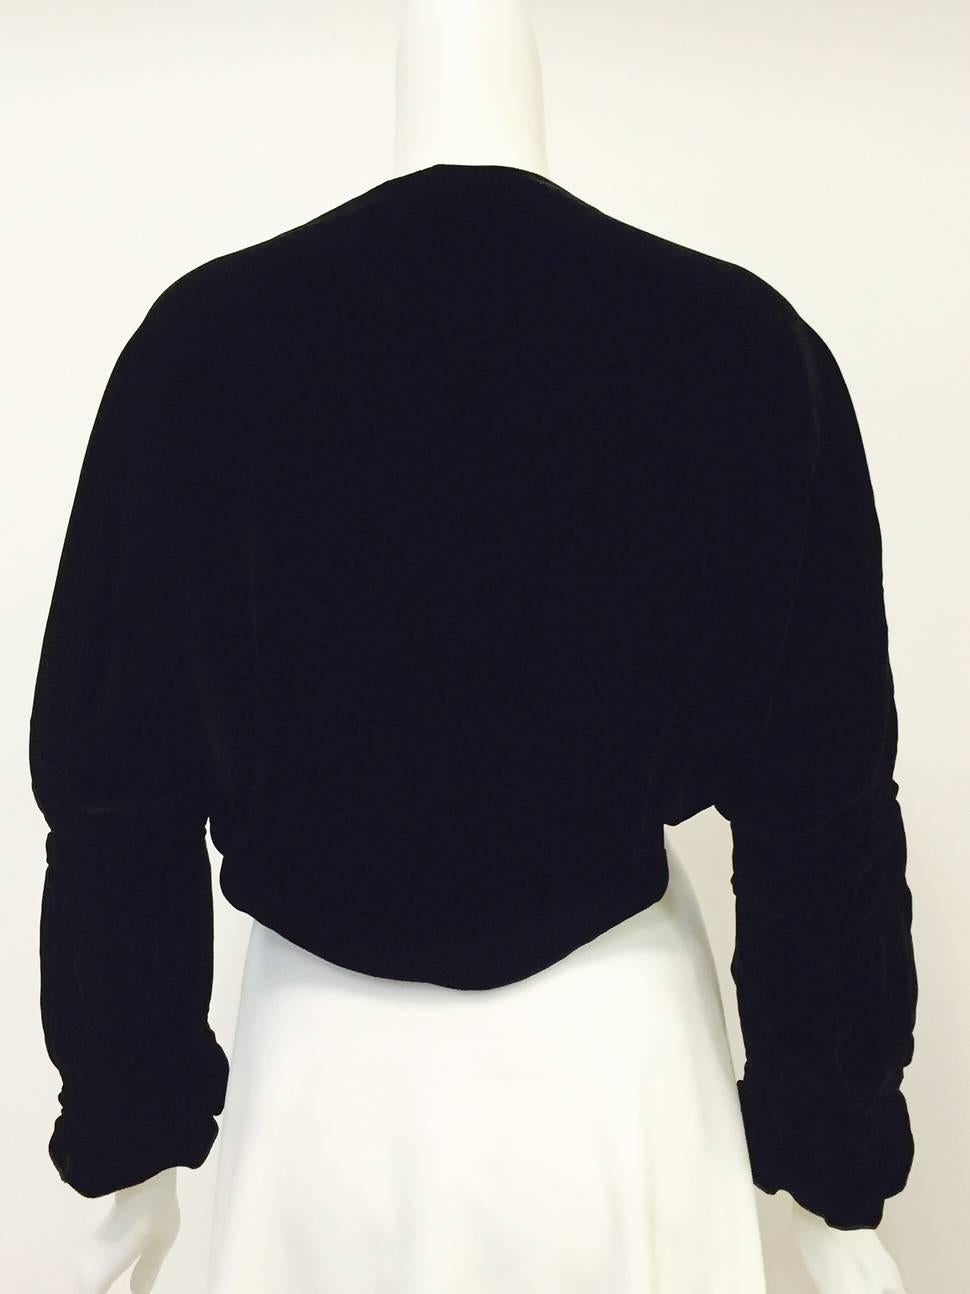 New Giorgio Armani Black Velvet Shrug is the perfect choice when an evening calls for a most elegant cover-up!  Features luxurious fabric inside and out...Velvet exterior is advanced gathering techniques worthy of a Shakespearean tragedy! 